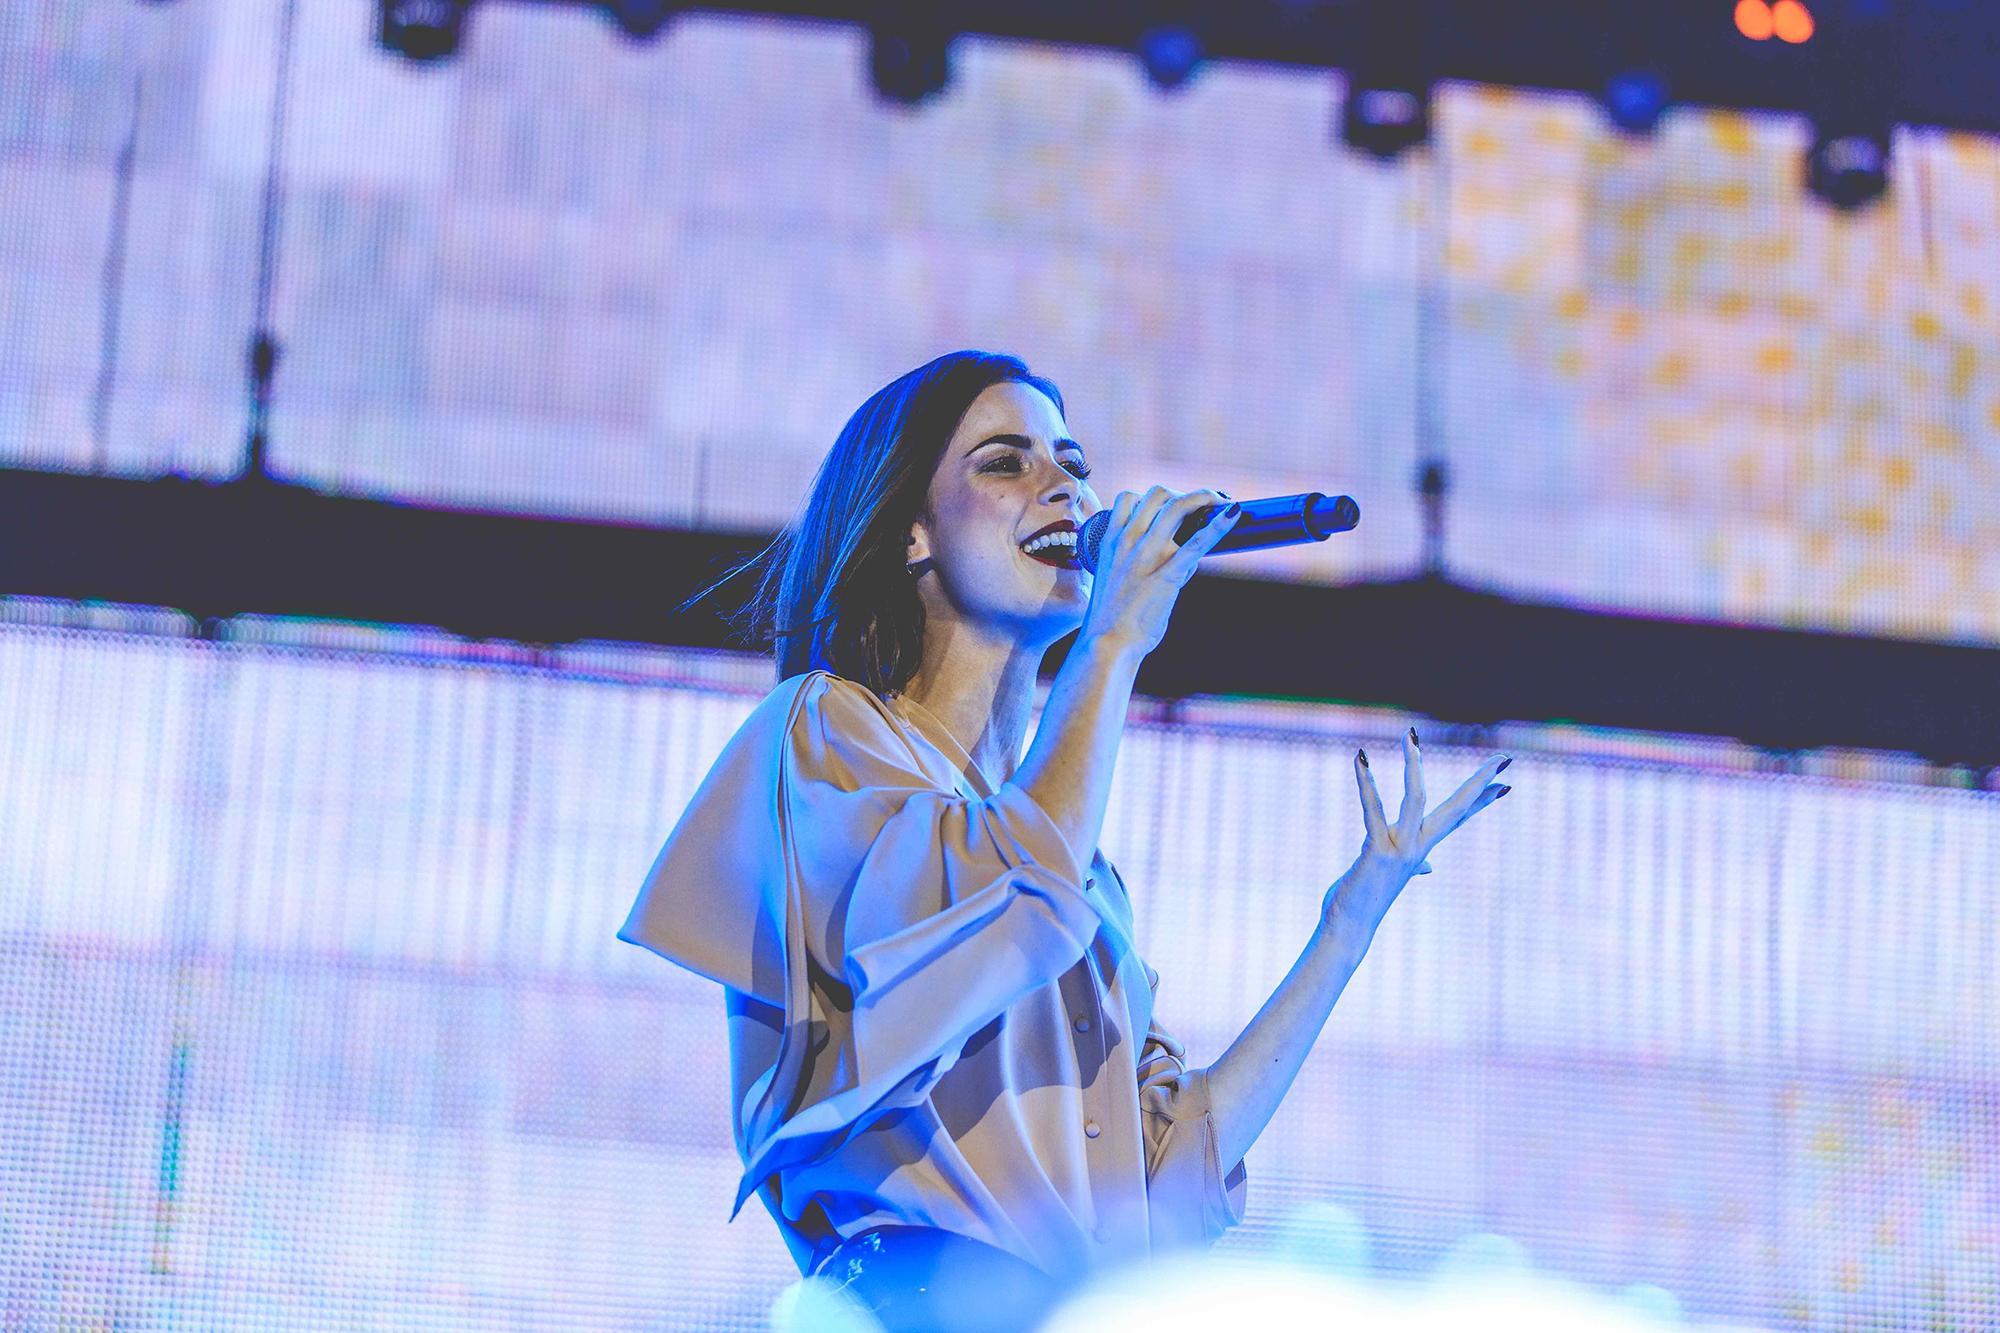 A singer performs on stage with a wall of LEDs behind her.